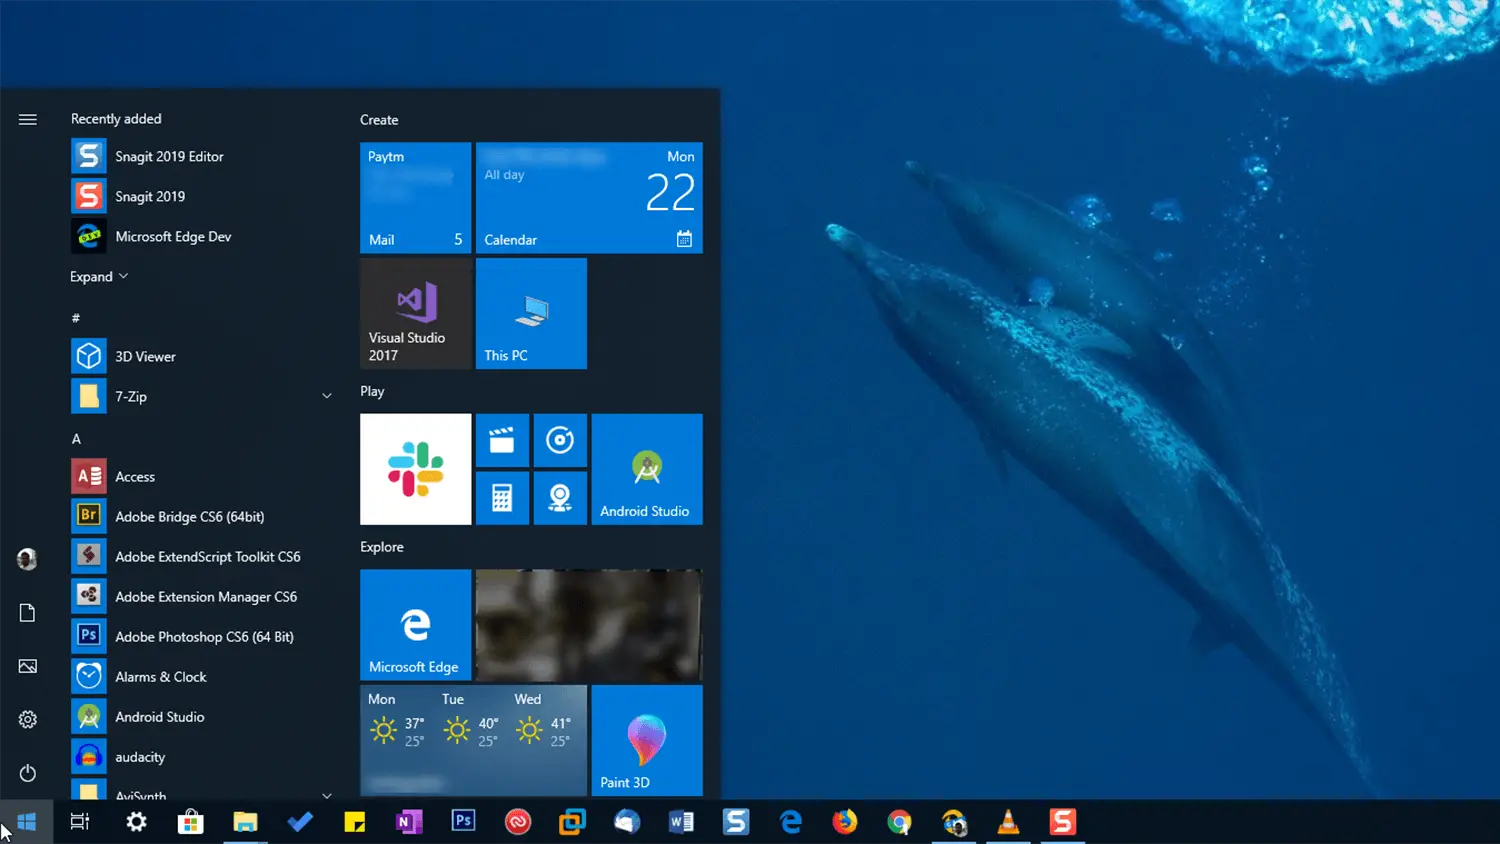 Where Is My Computer on Windows 10 Start Menu? Here It Is